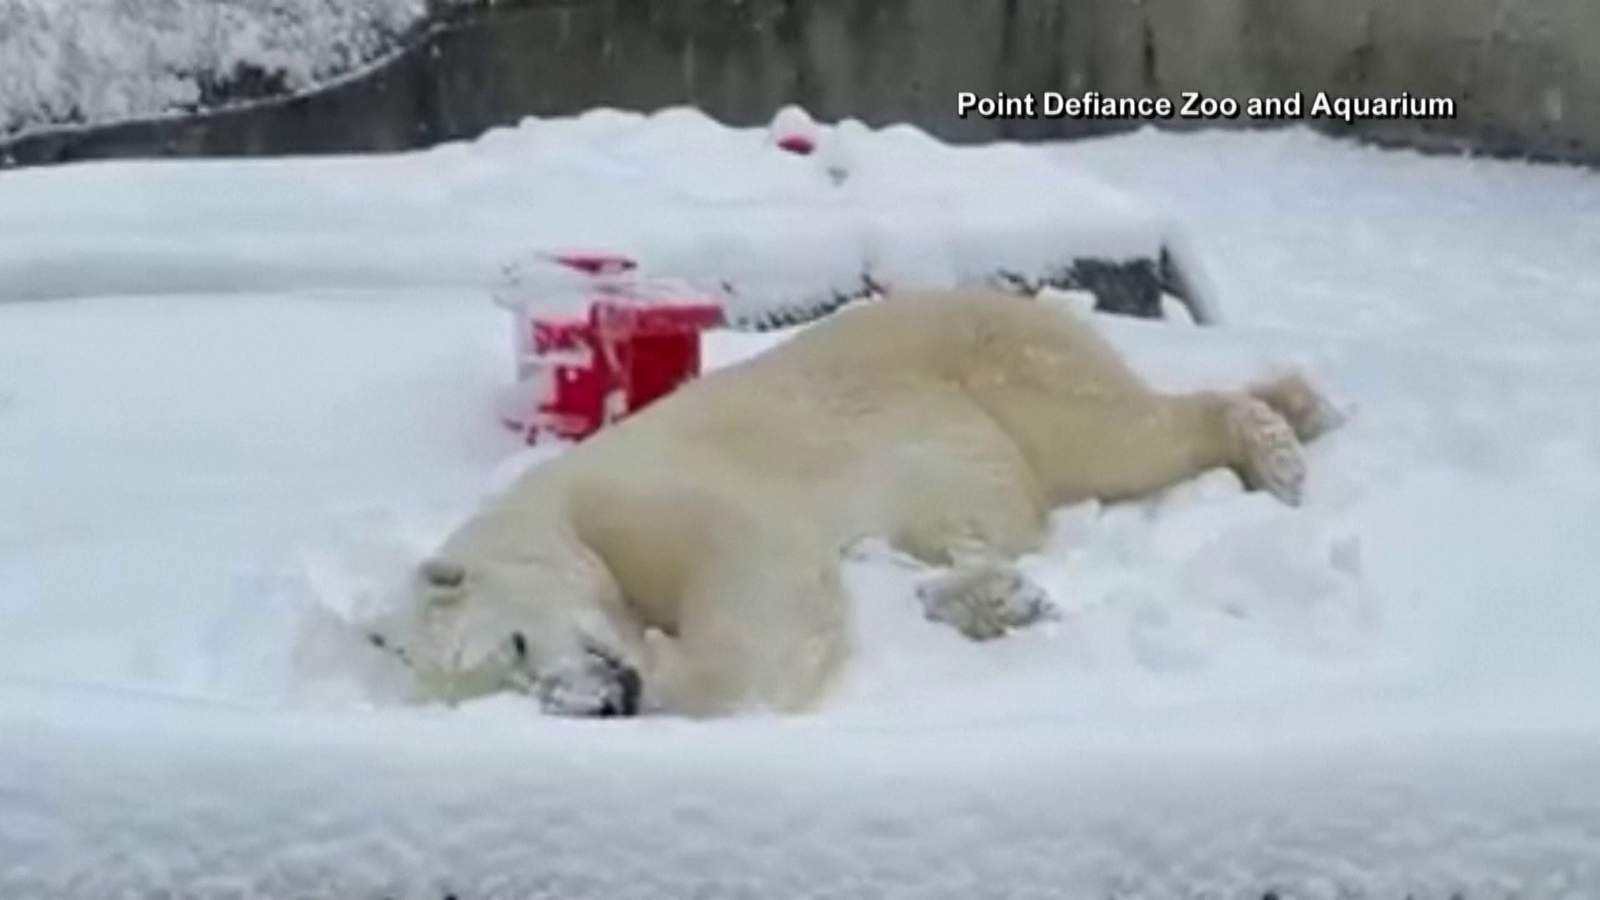 WATCH: This 25-year-old polar bear is living his best life